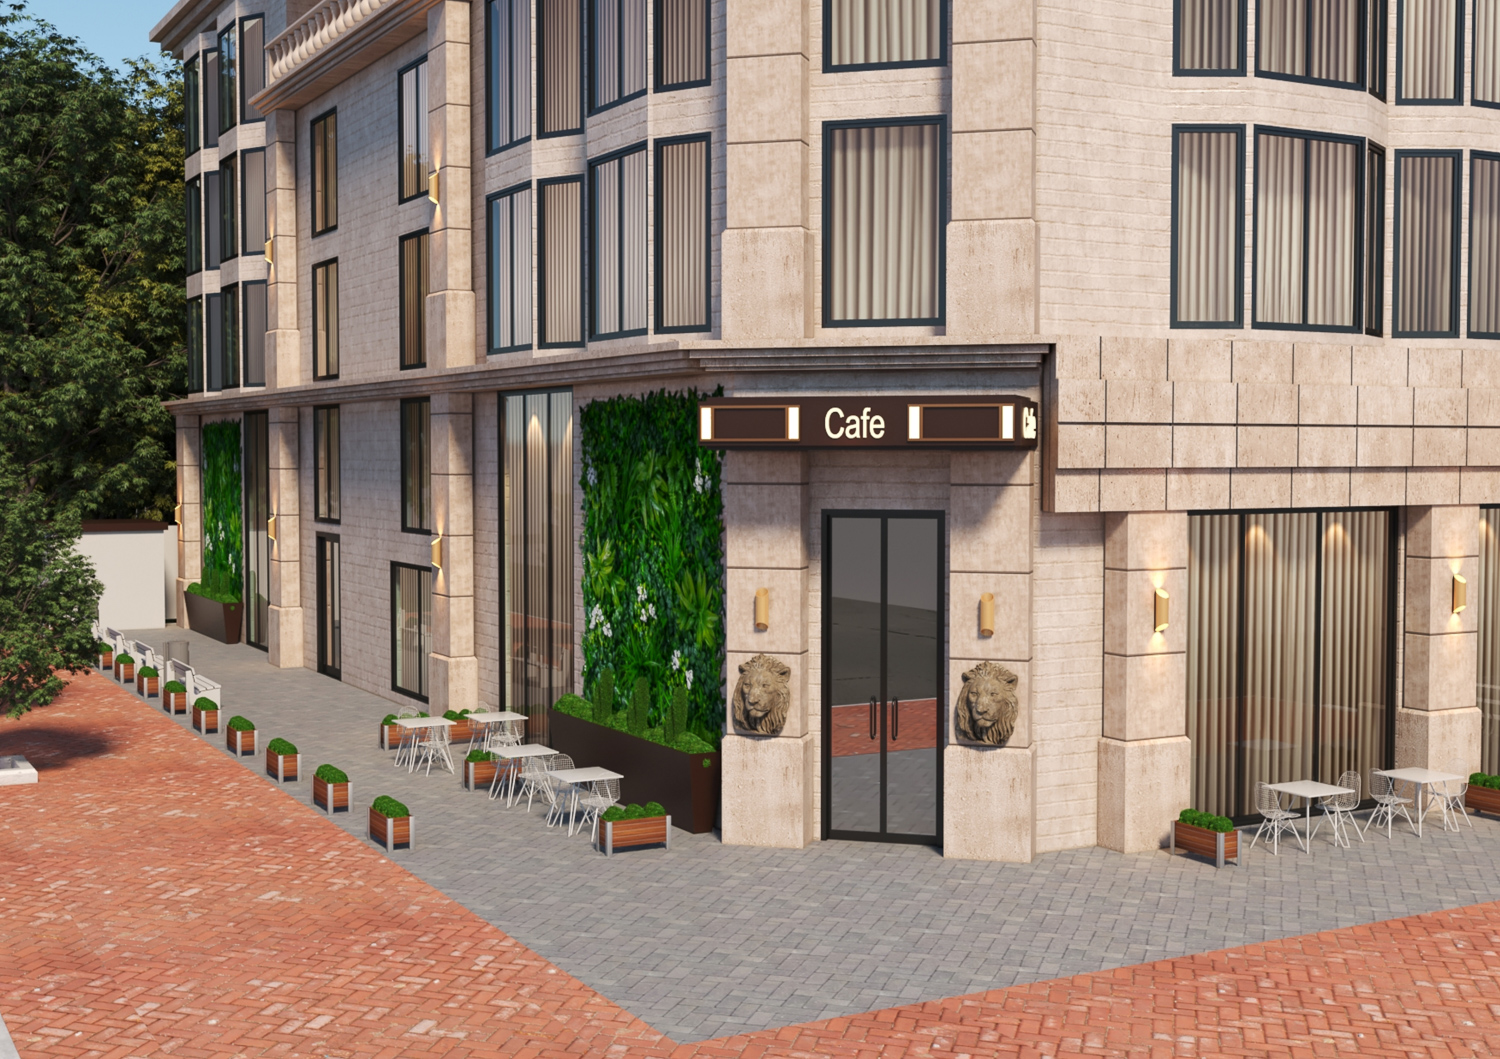 615 Stockton Avenue cafe entry, illustration from Infinite Investment Realty